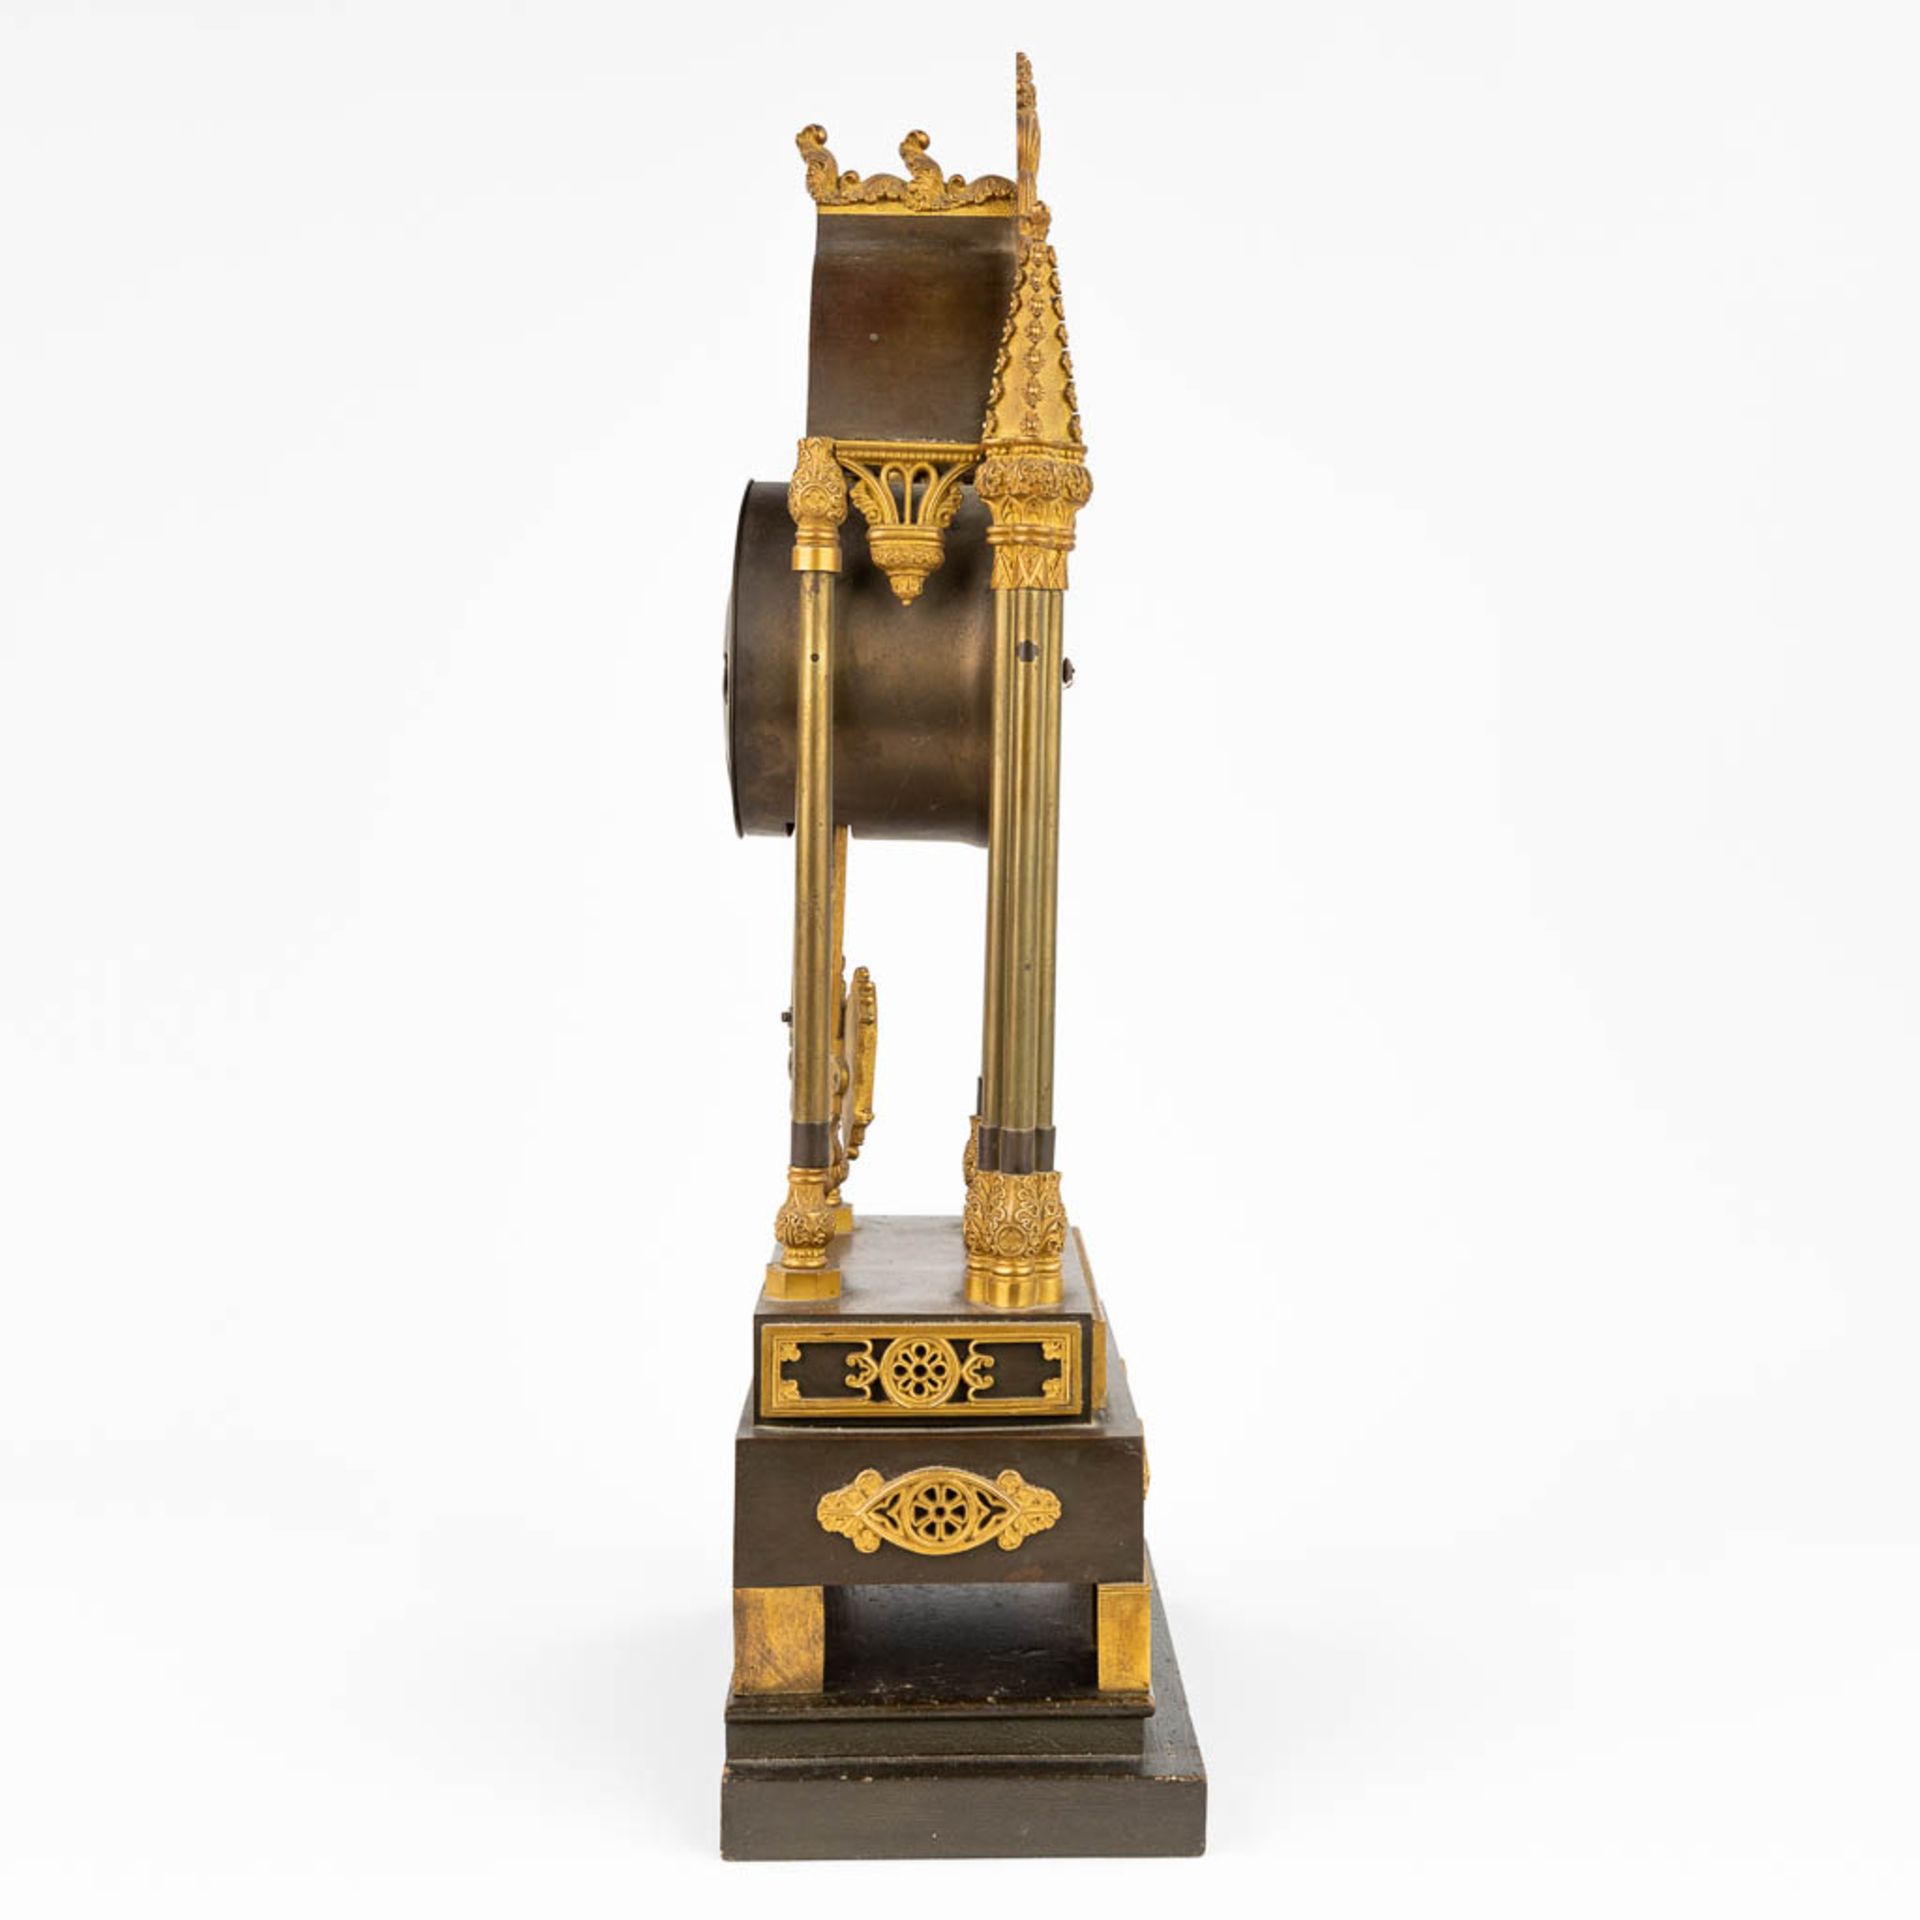 A table column clock made of gilt bronze in a gothic revival style. (11 x 19,5 x 43cm) - Image 2 of 15